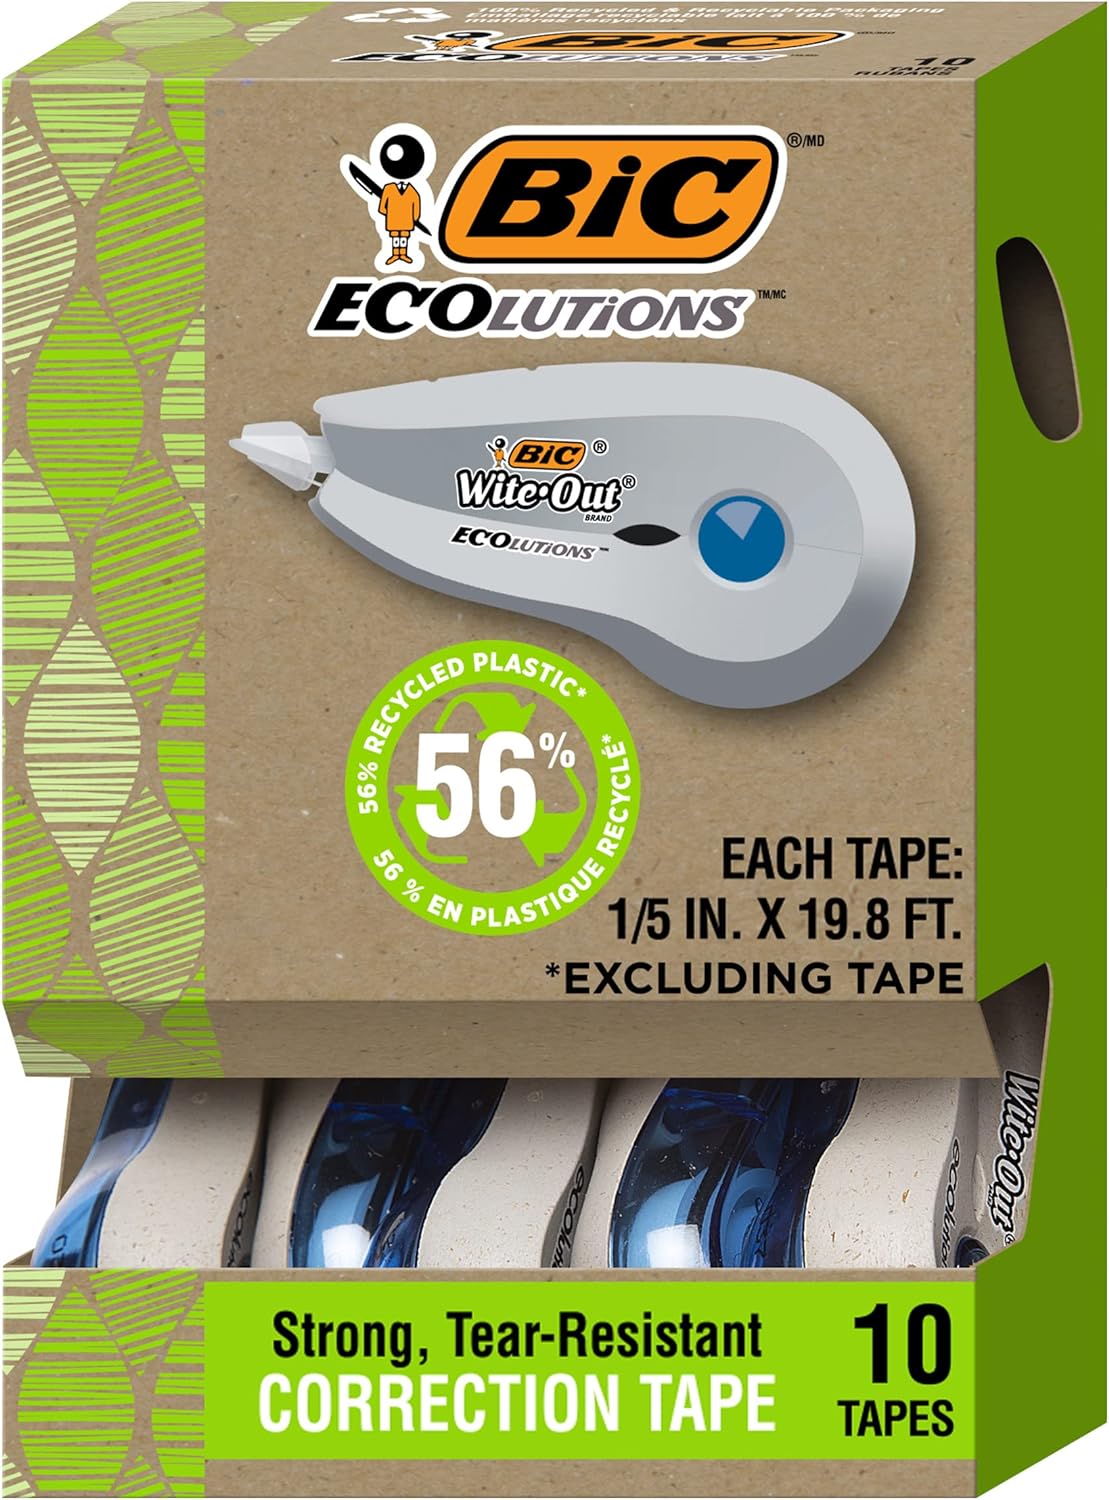 BIC Ecolutions Wite-Out Brand Correction Tape, 19.8 Feet, 10-Count Pack, Correction Tape Made from 56% Recycled Plastic Excluding Tape